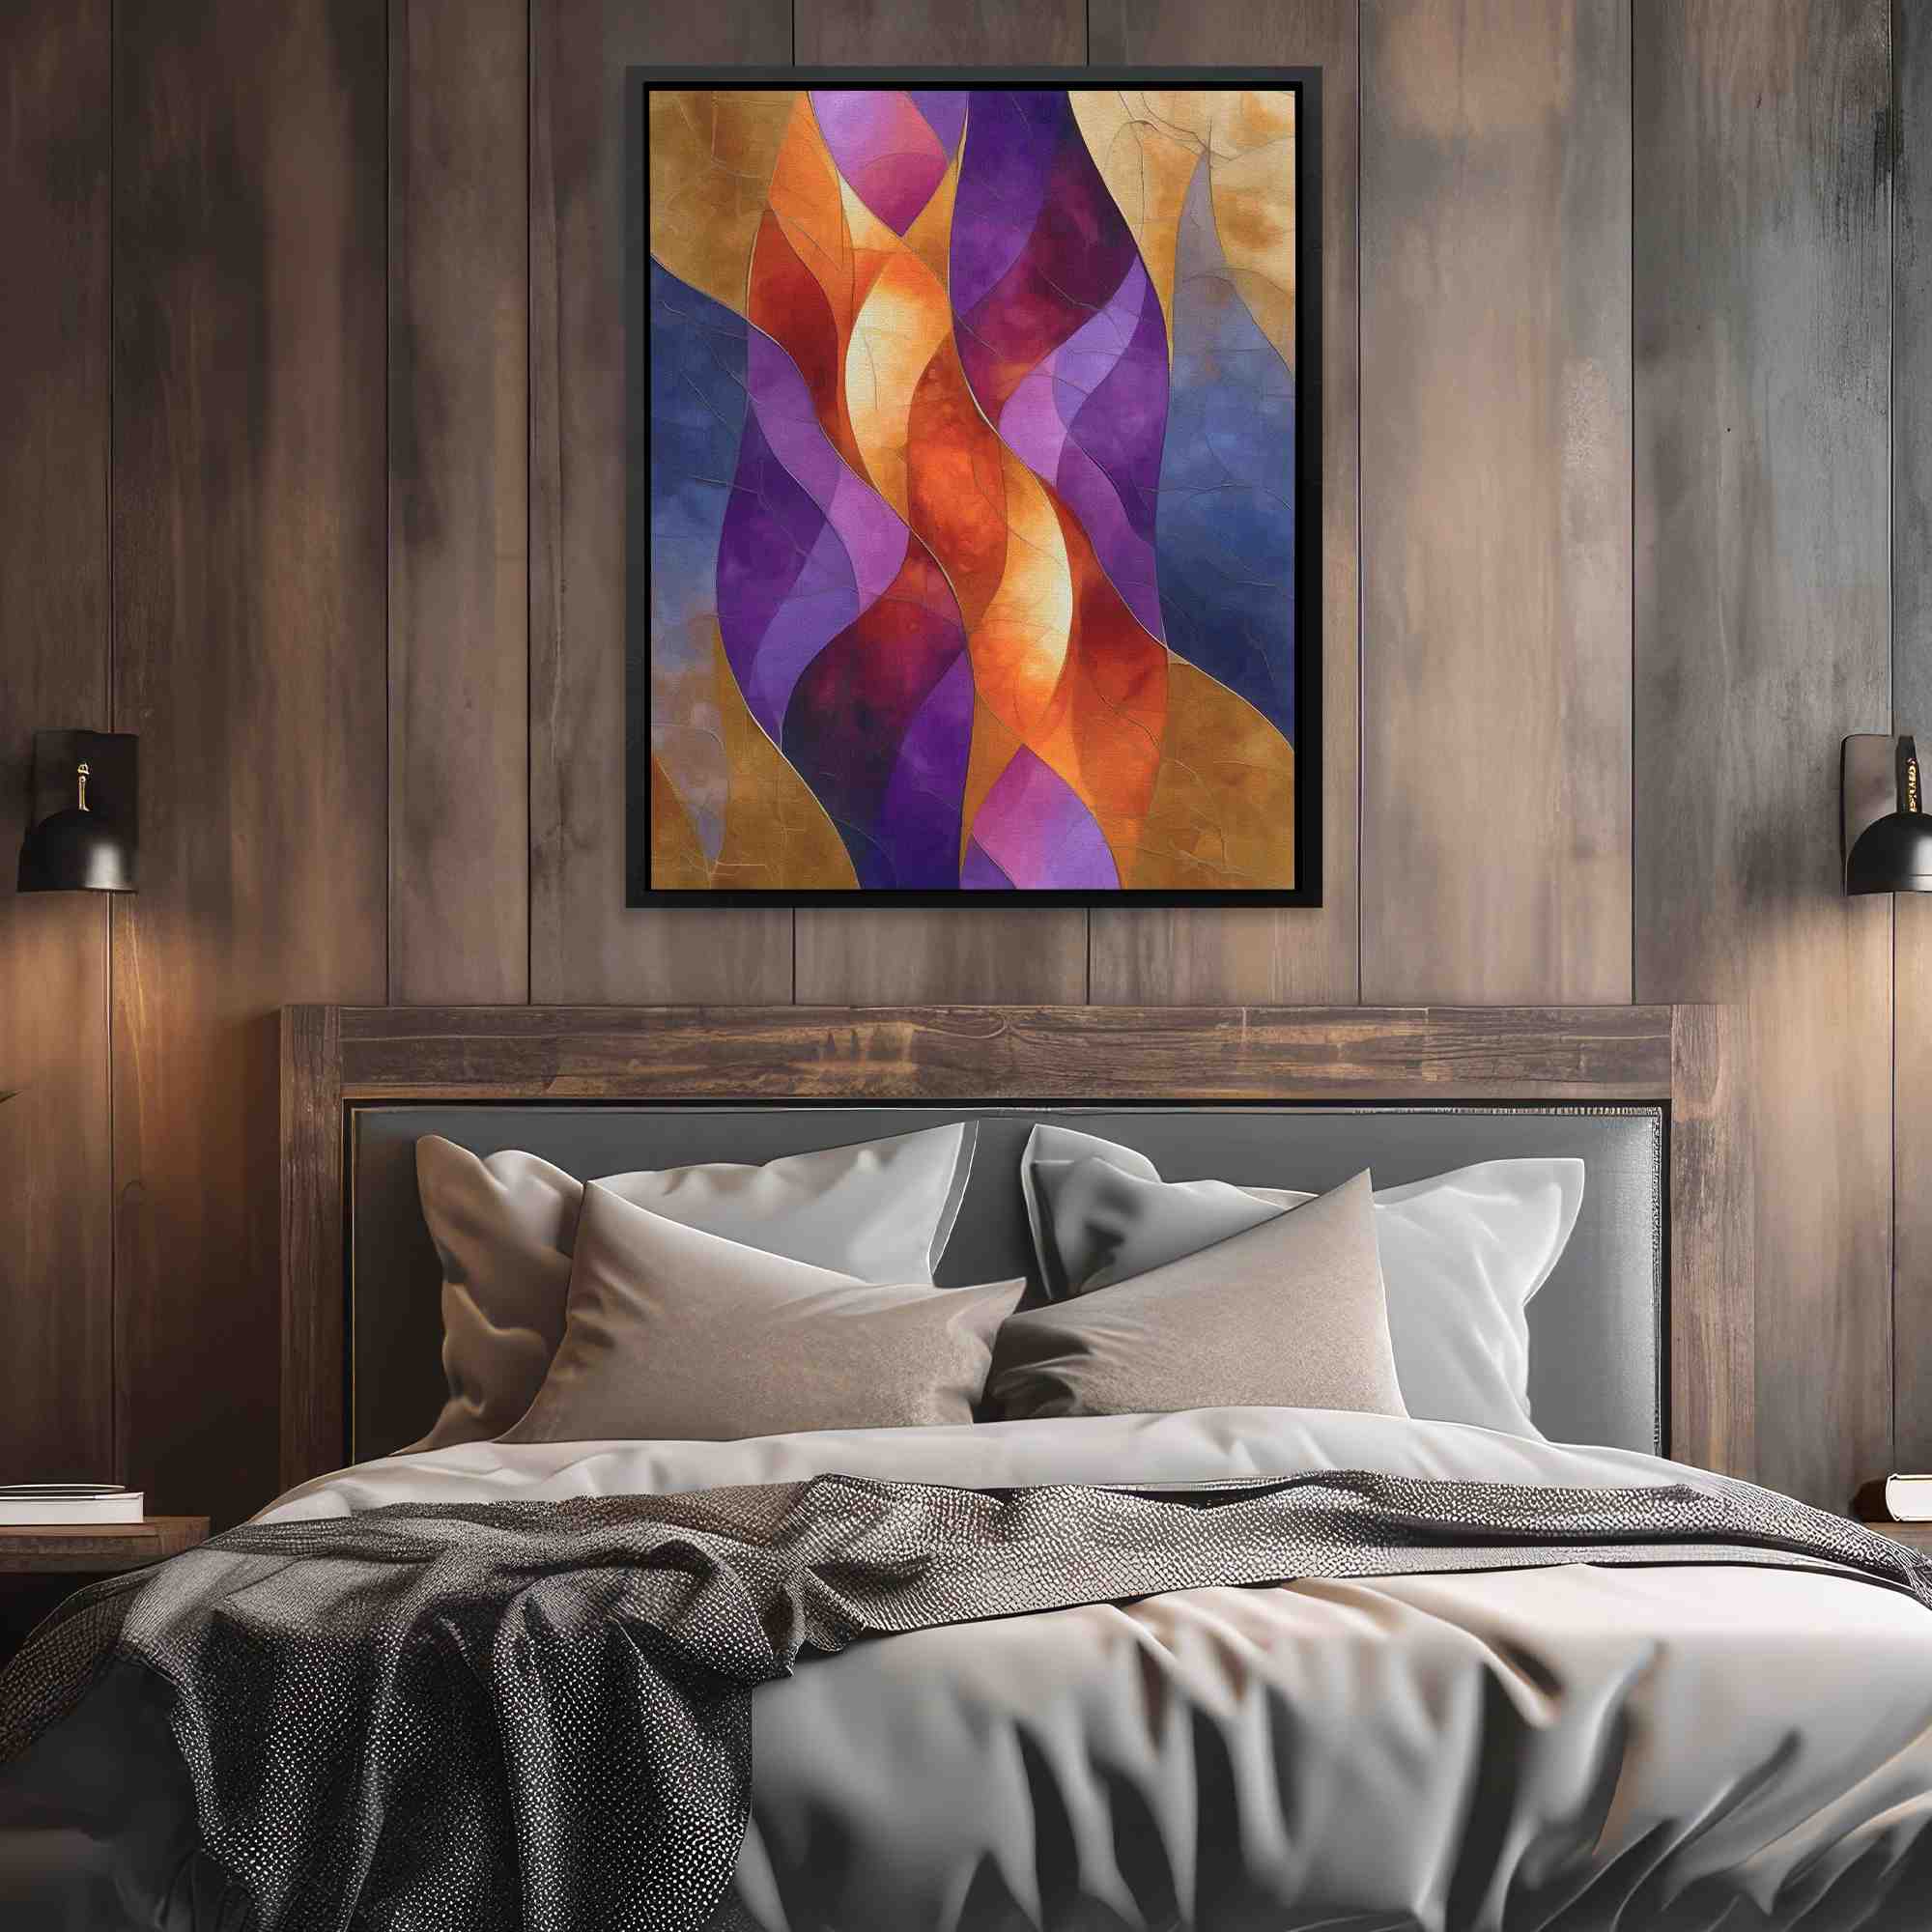 a painting of abstract shapes on a canvas